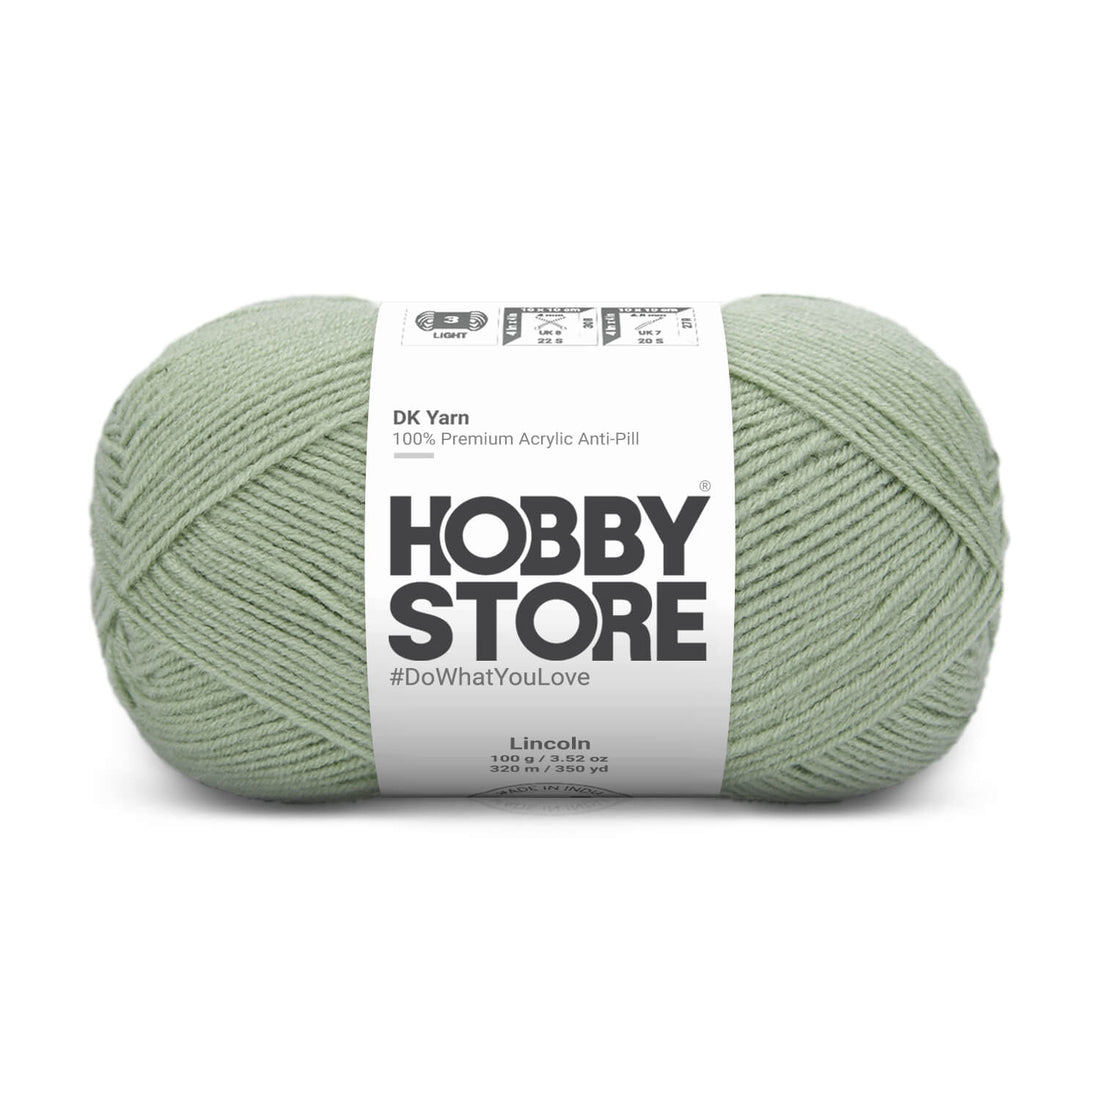 DK Anti-Pill Yarn by Hobby Store - Lincoln 1834